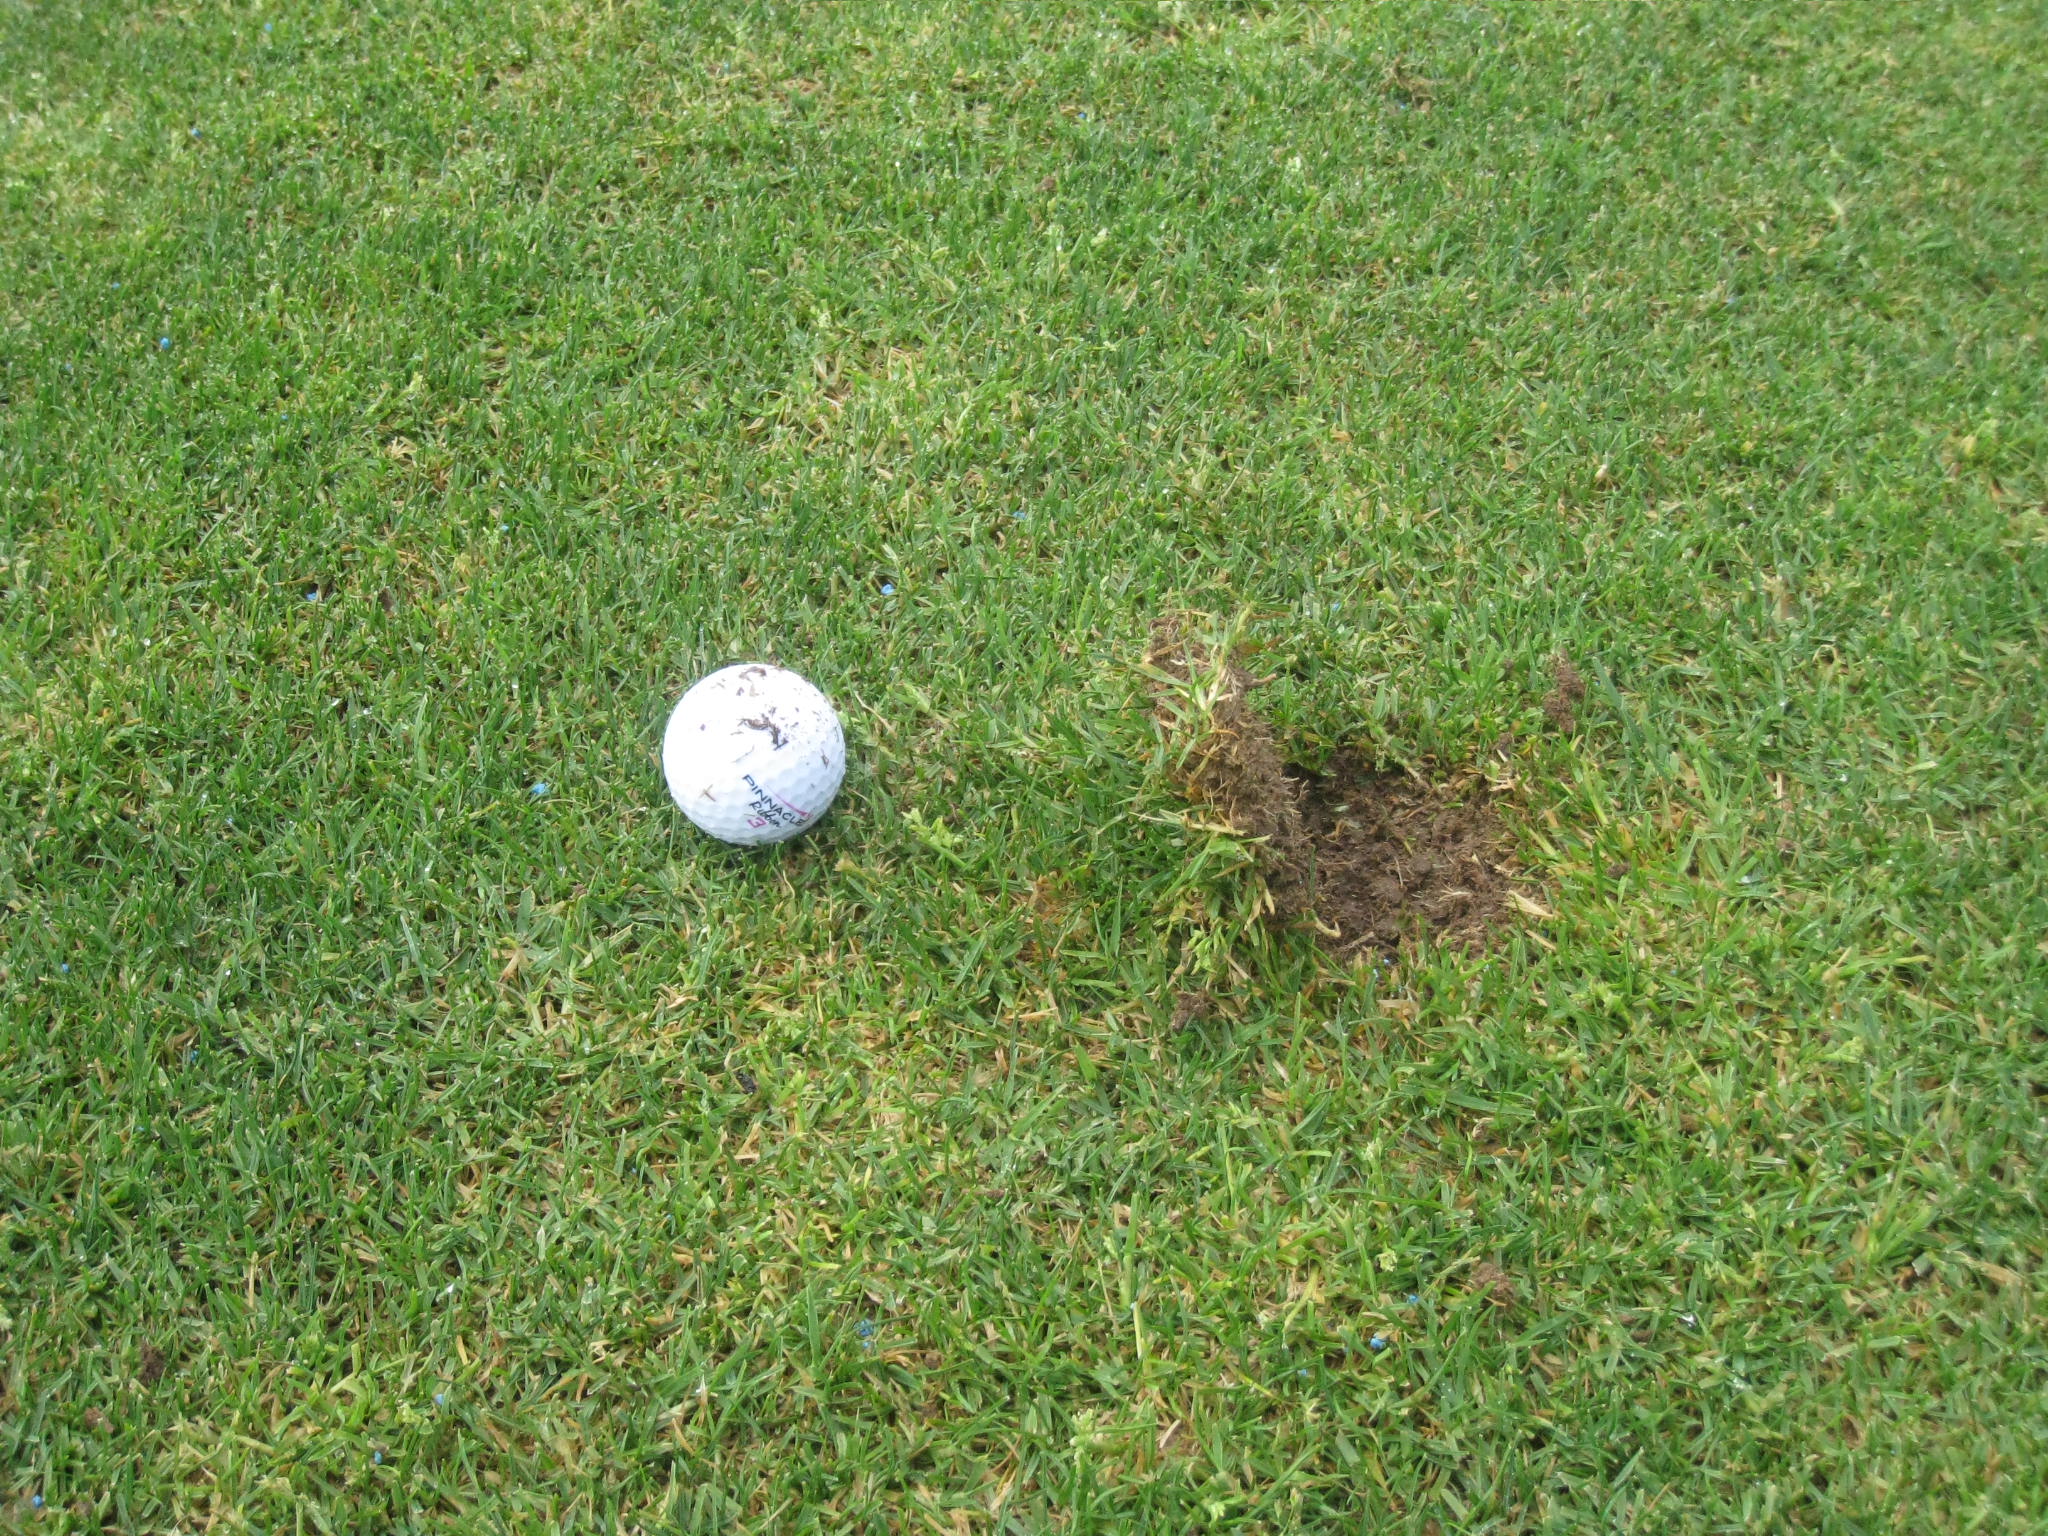 a white golf ball in the grass next to a hole